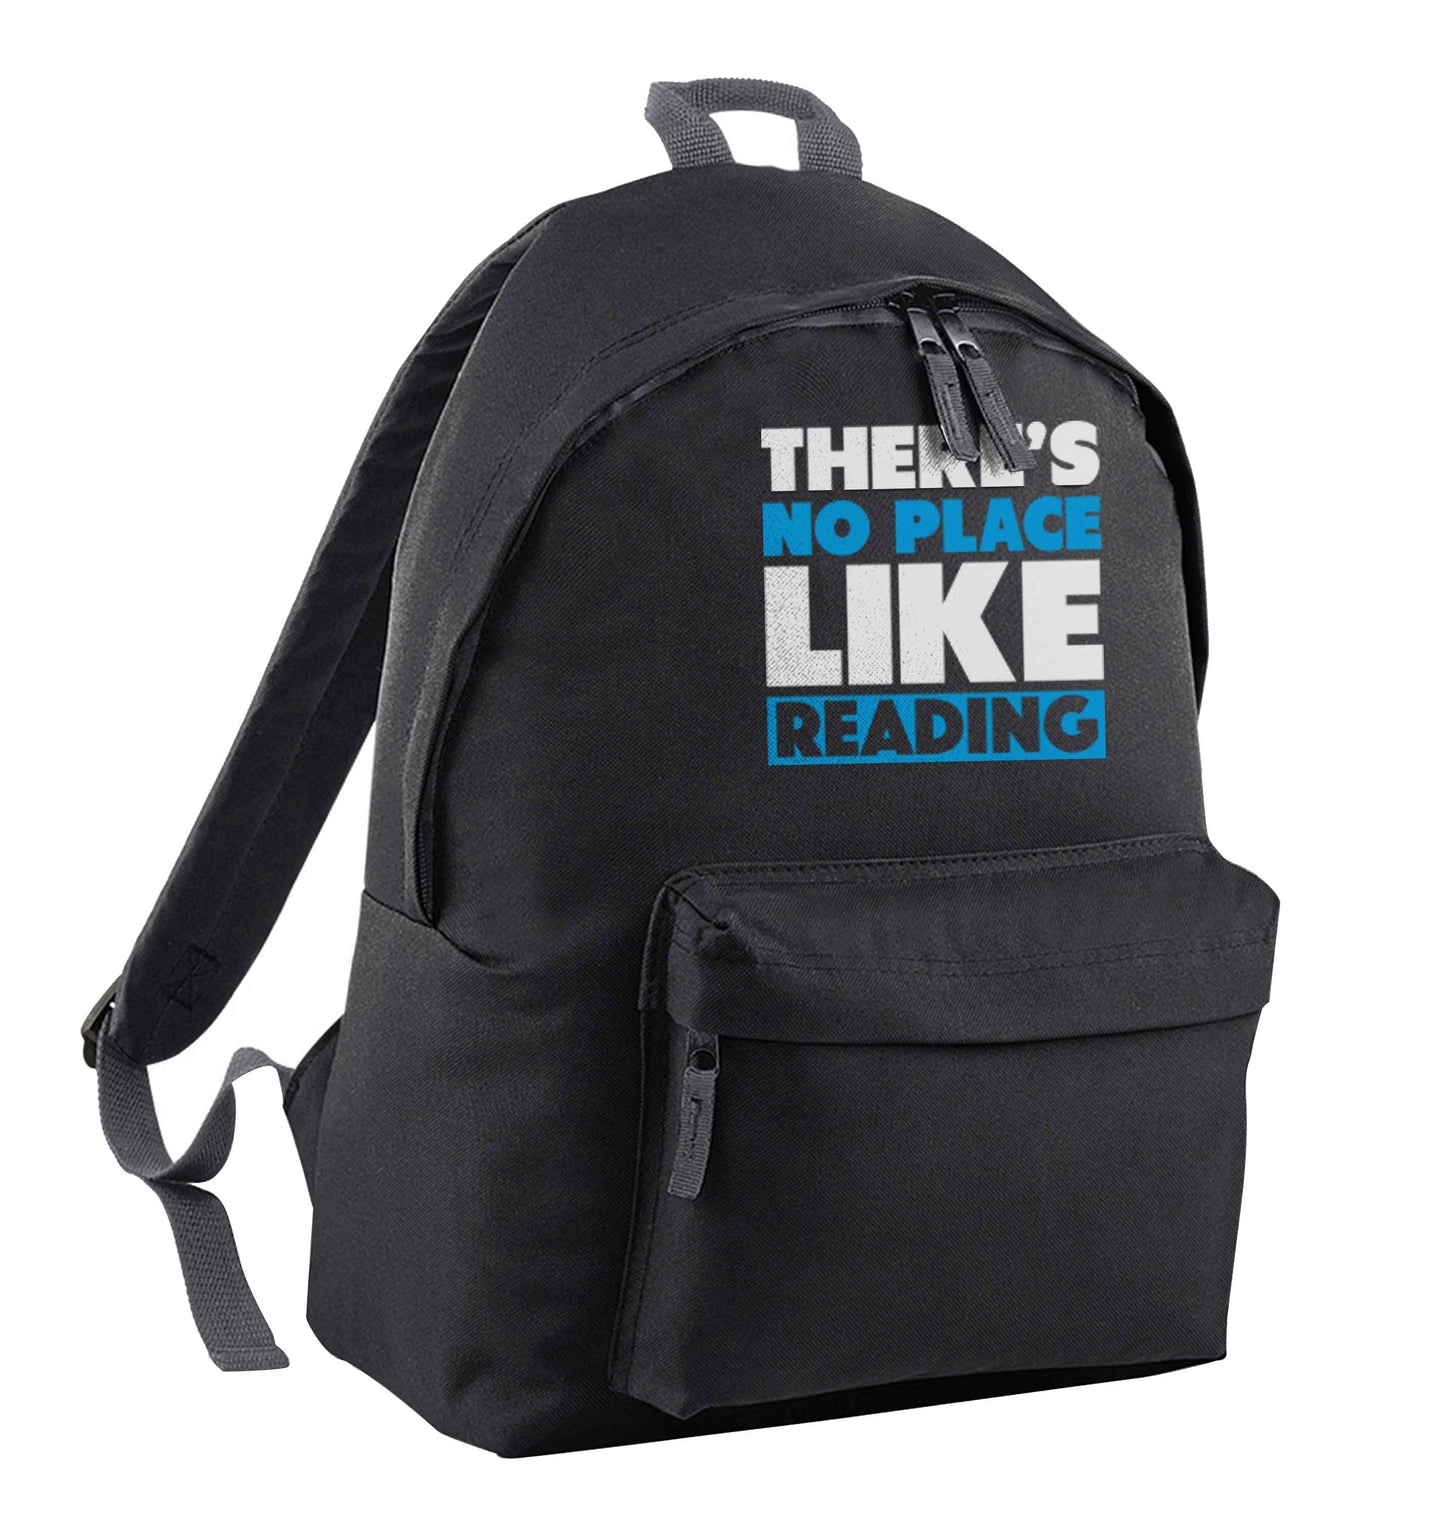 There's no place like Readingblack adults backpack